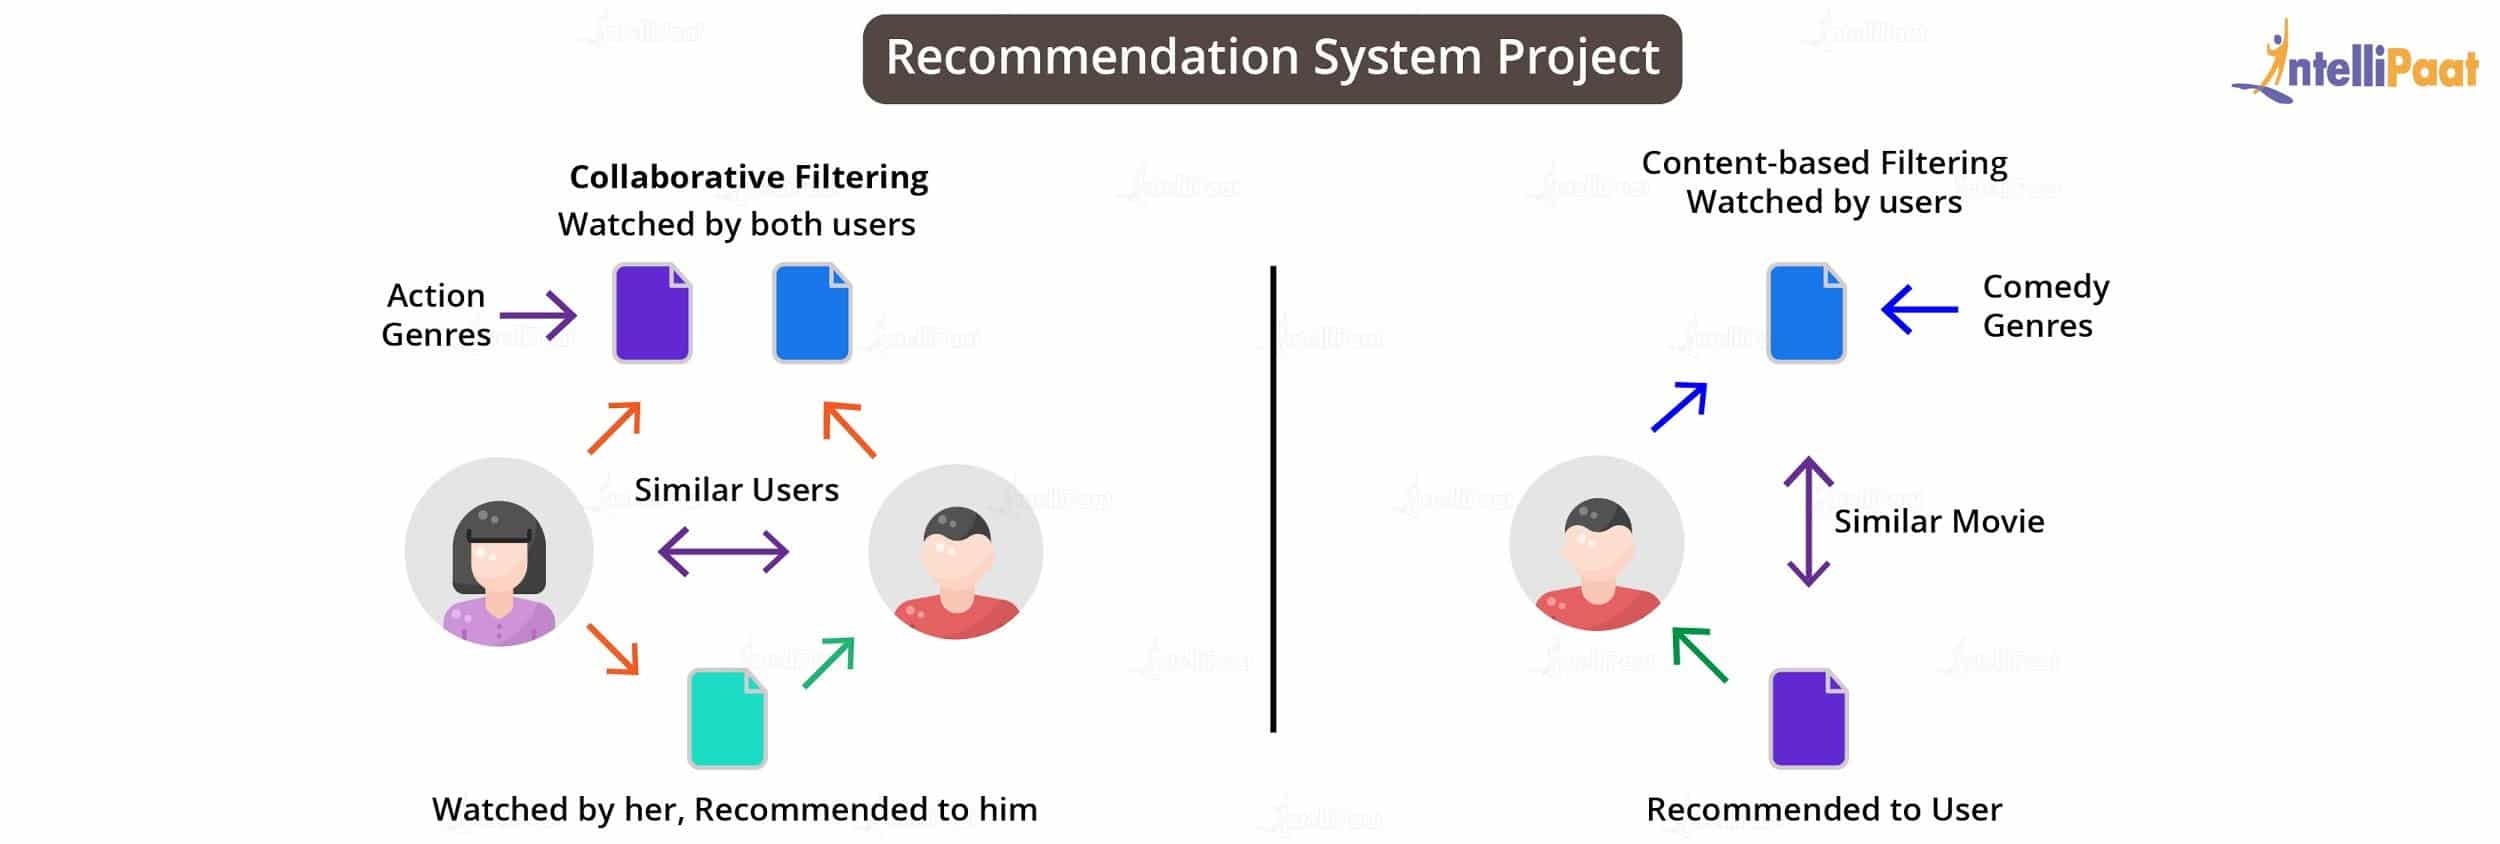 Recommendation System Project